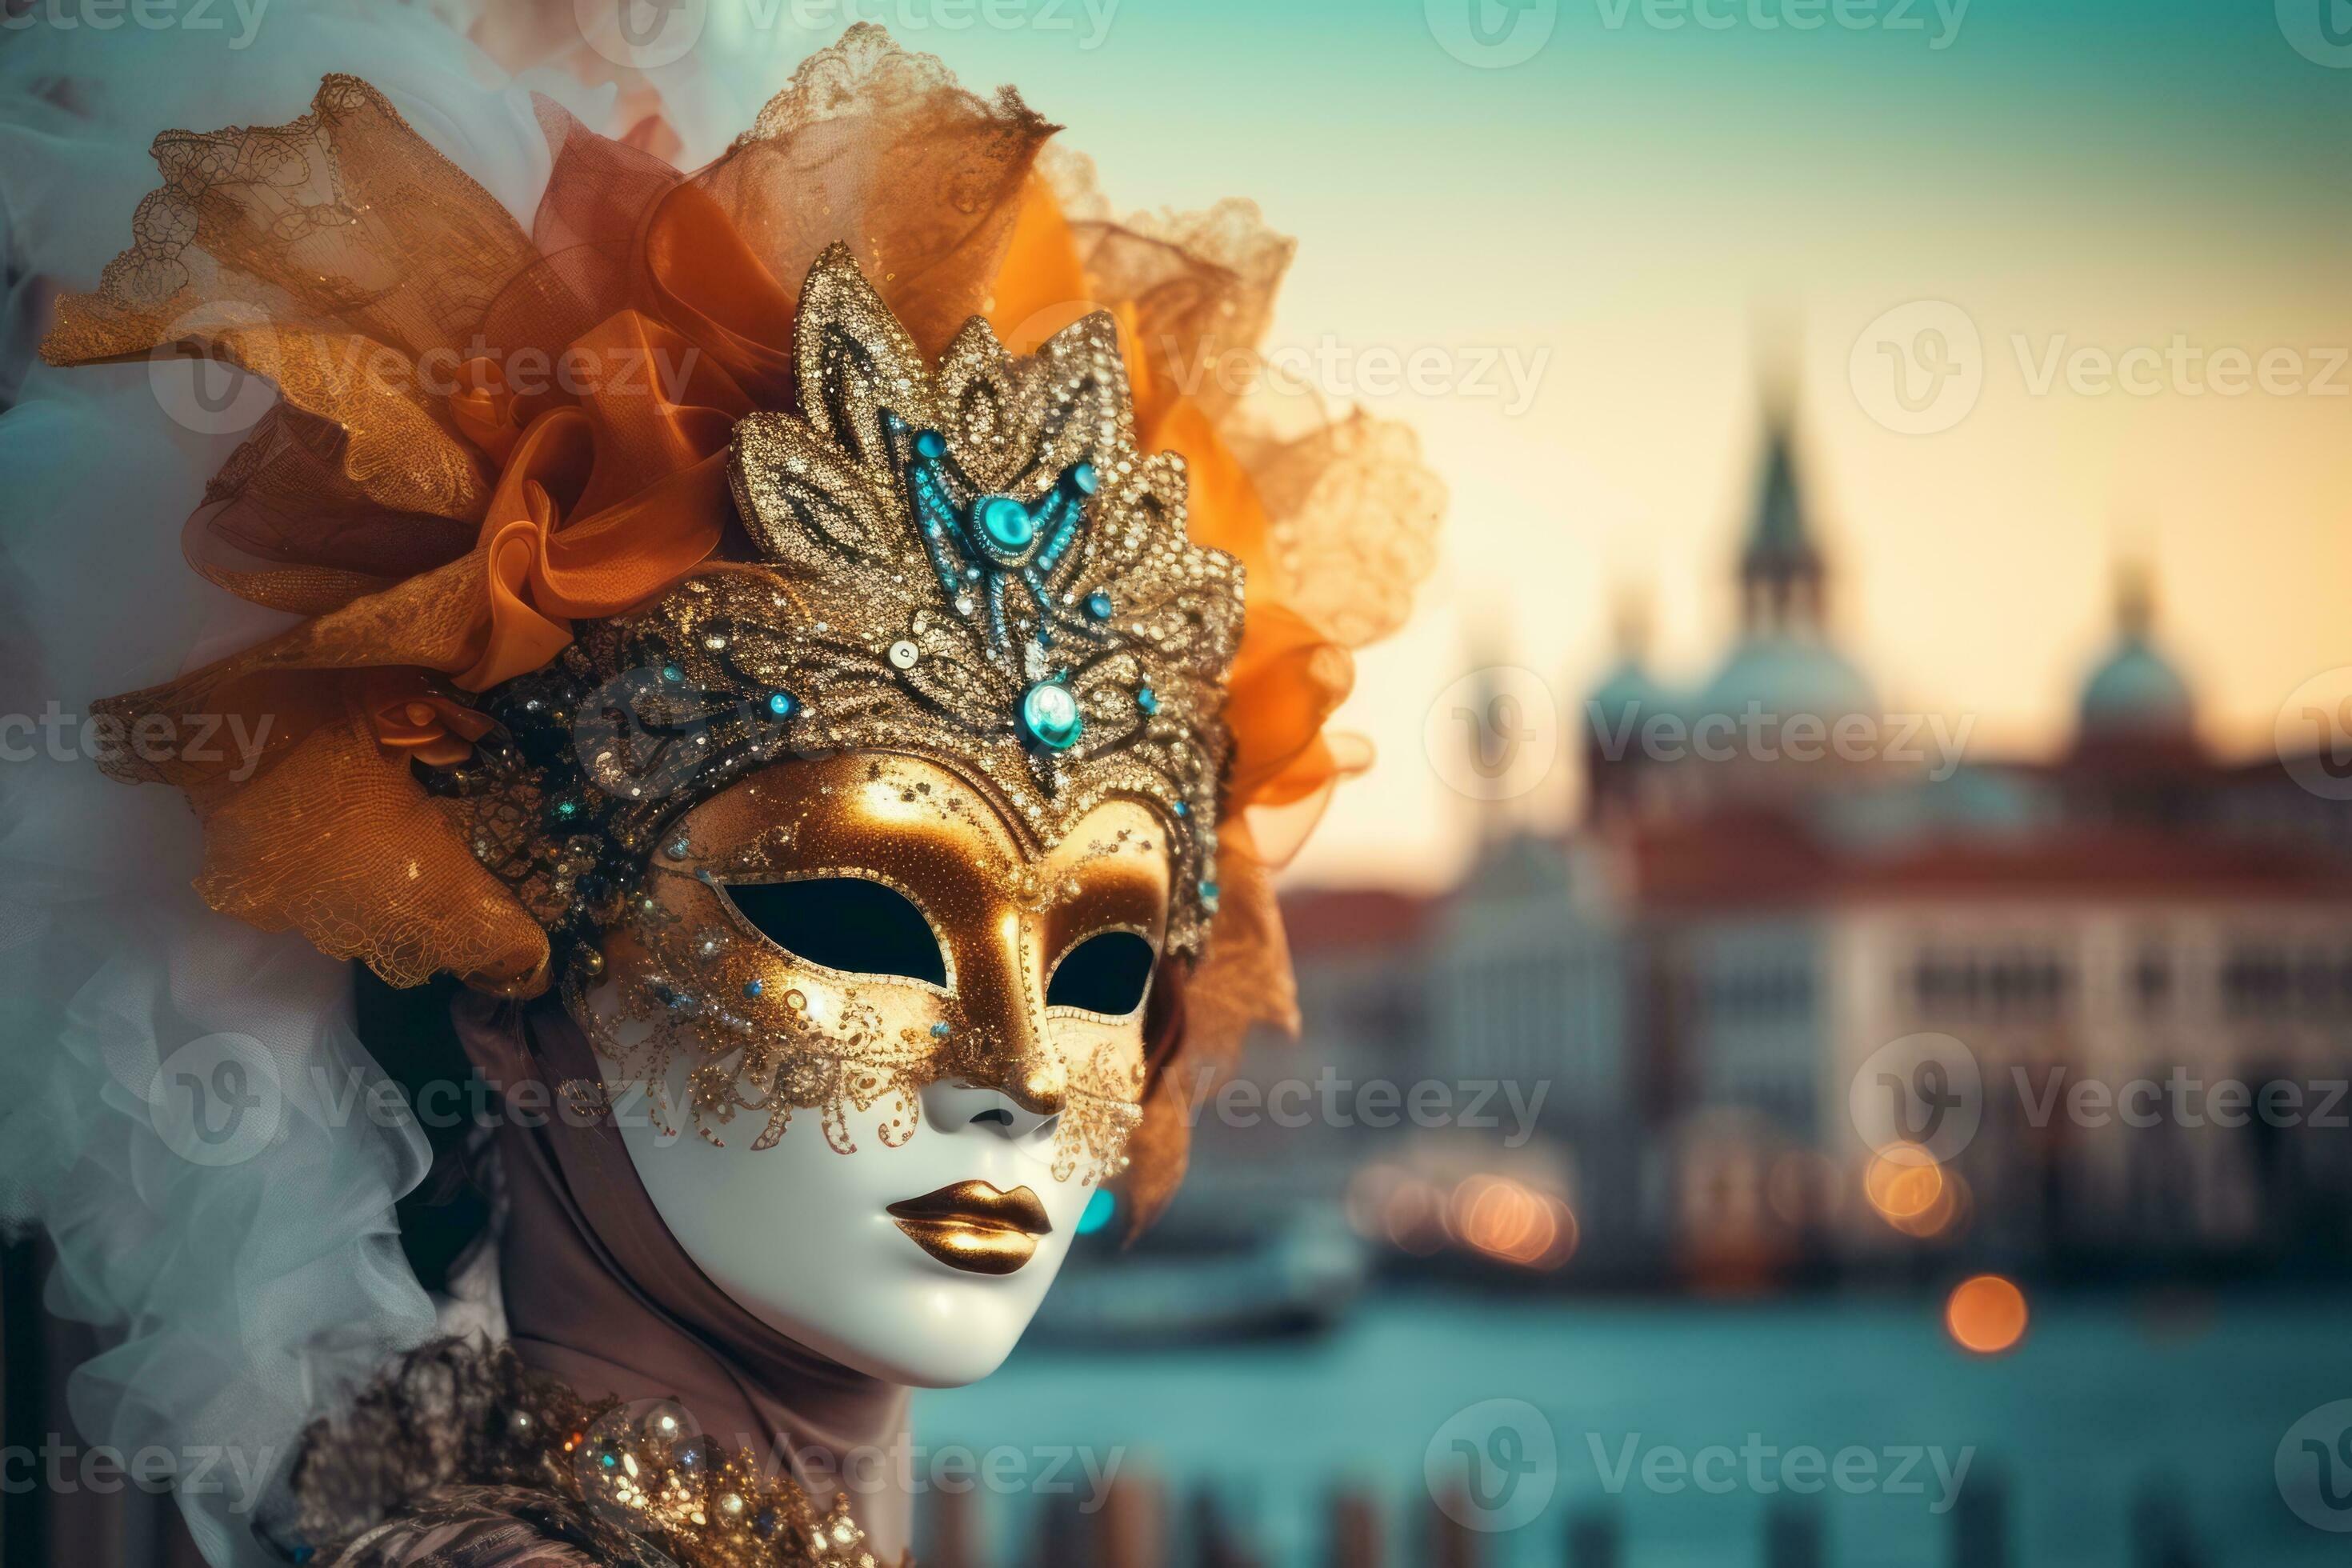 Venetian Carnival Mask worn by a stylish model, with a blurred